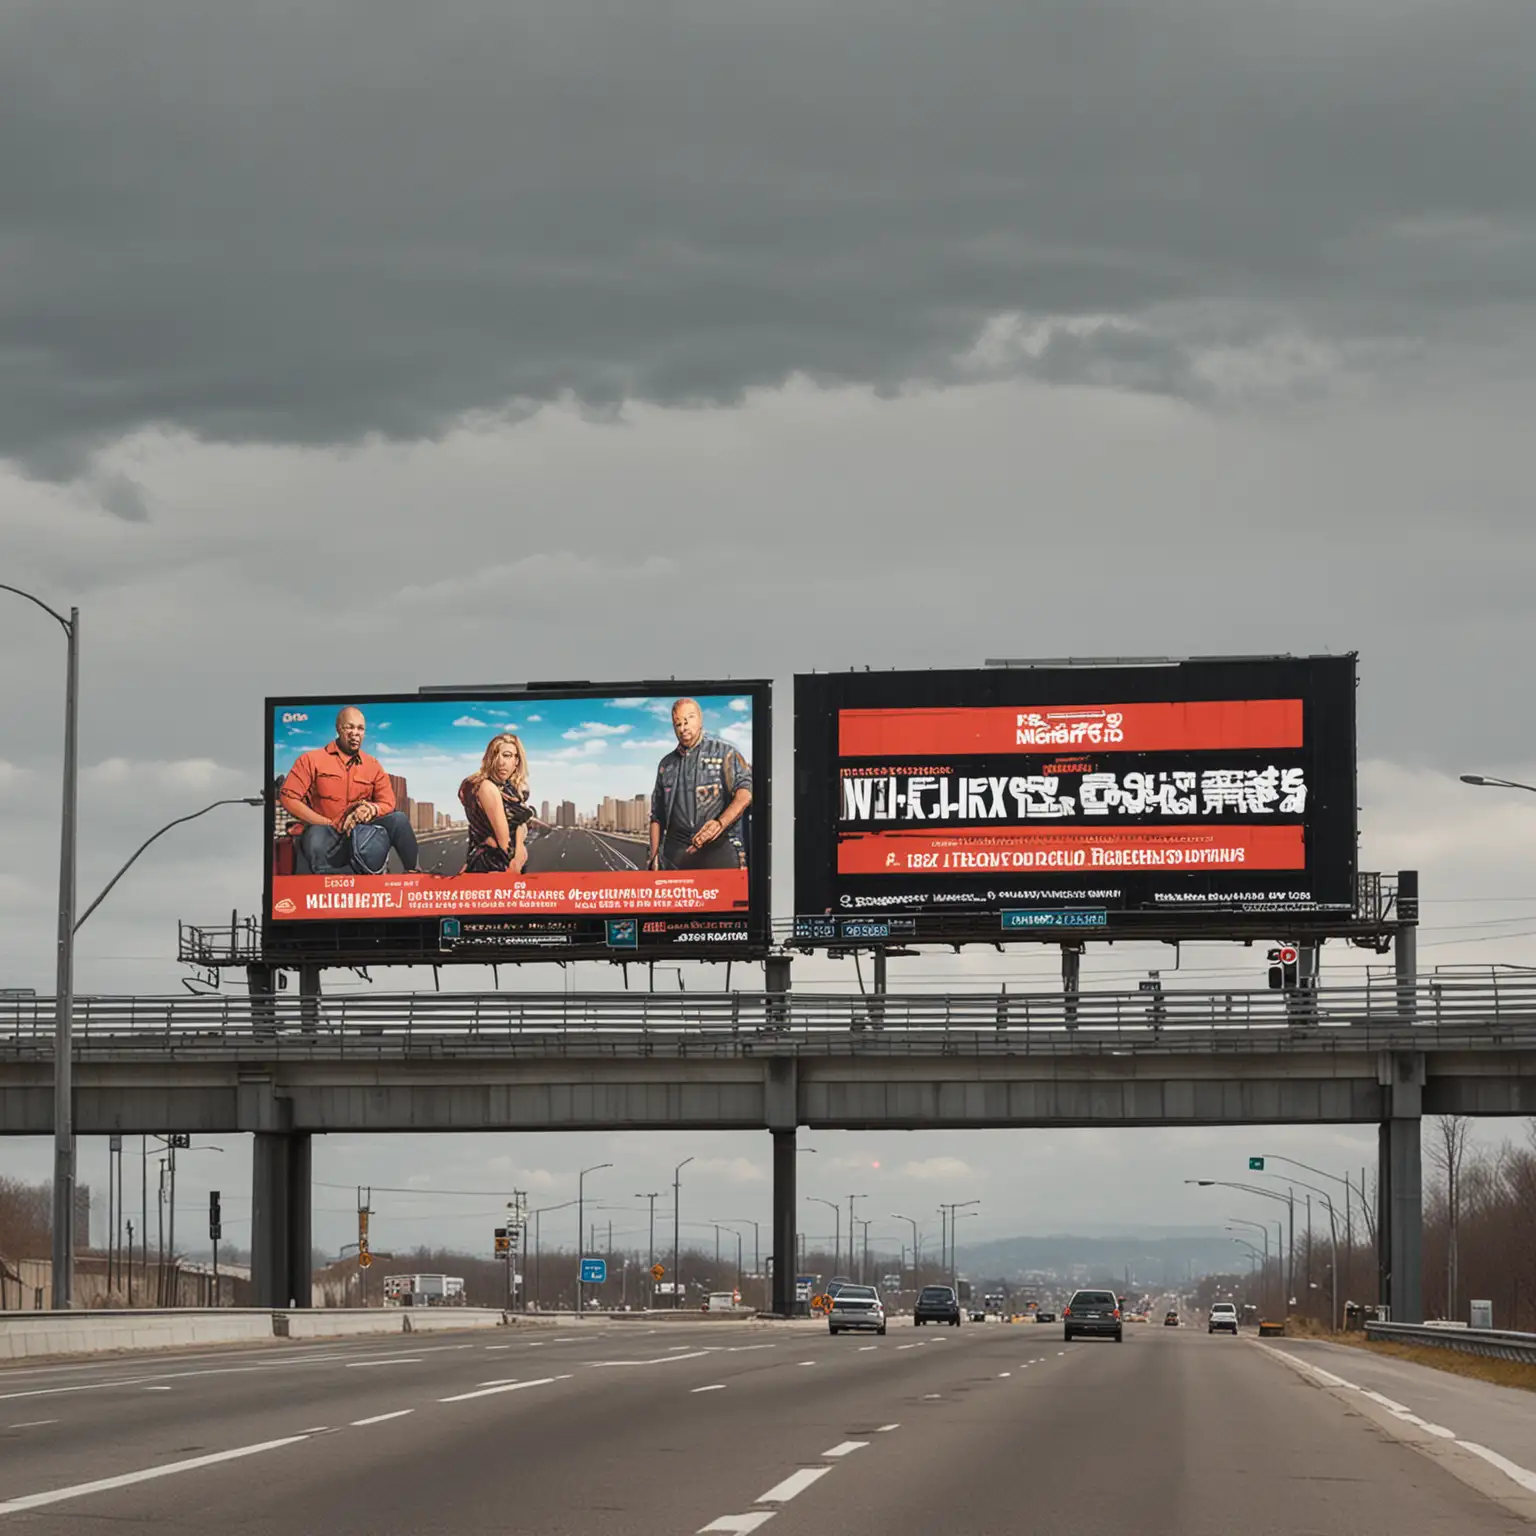 two billboard on above each other on highway